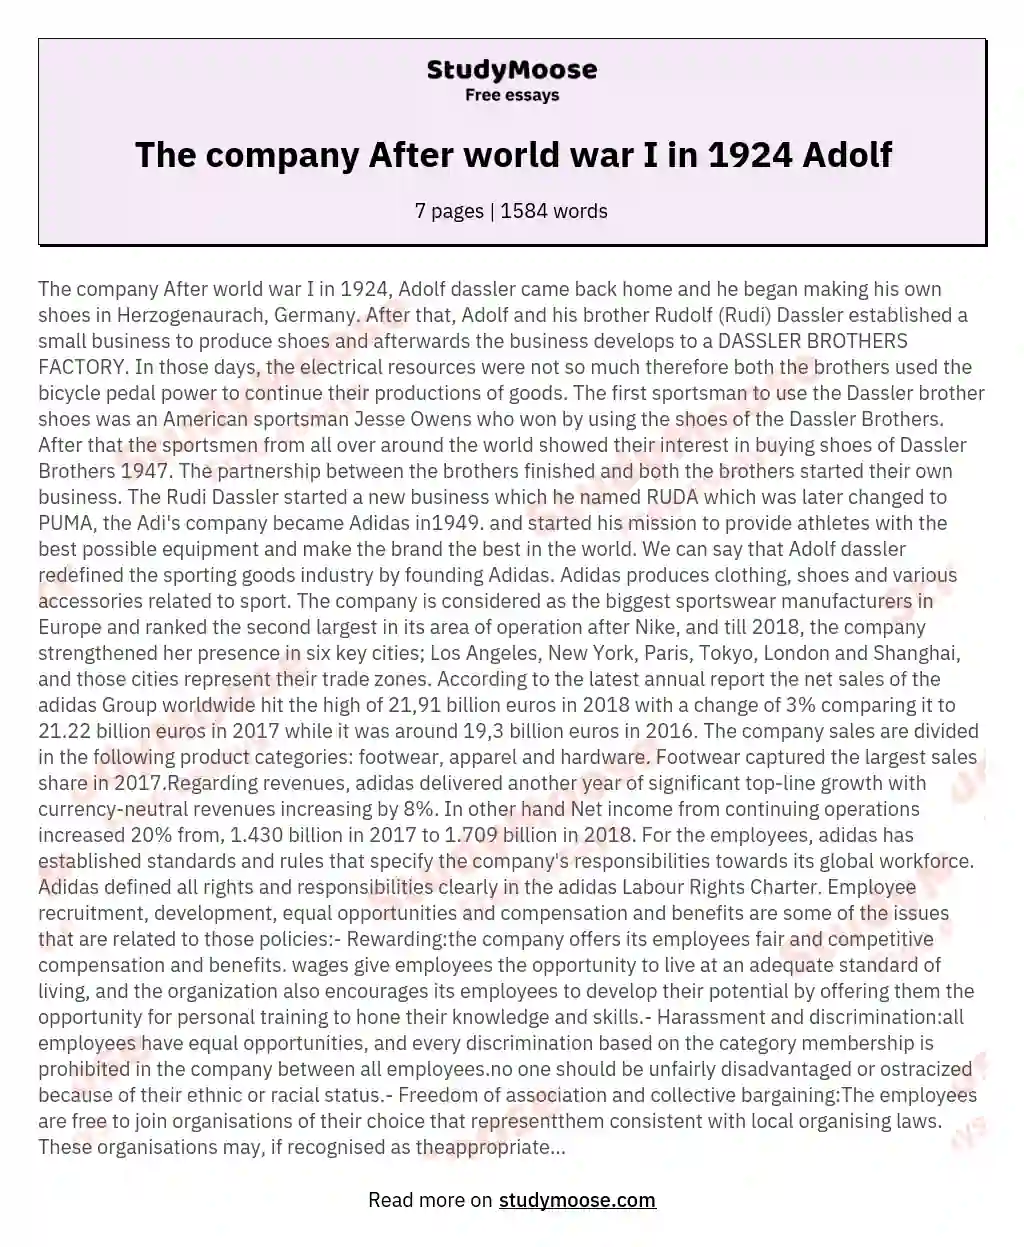 The company After world war I in 1924 Adolf essay